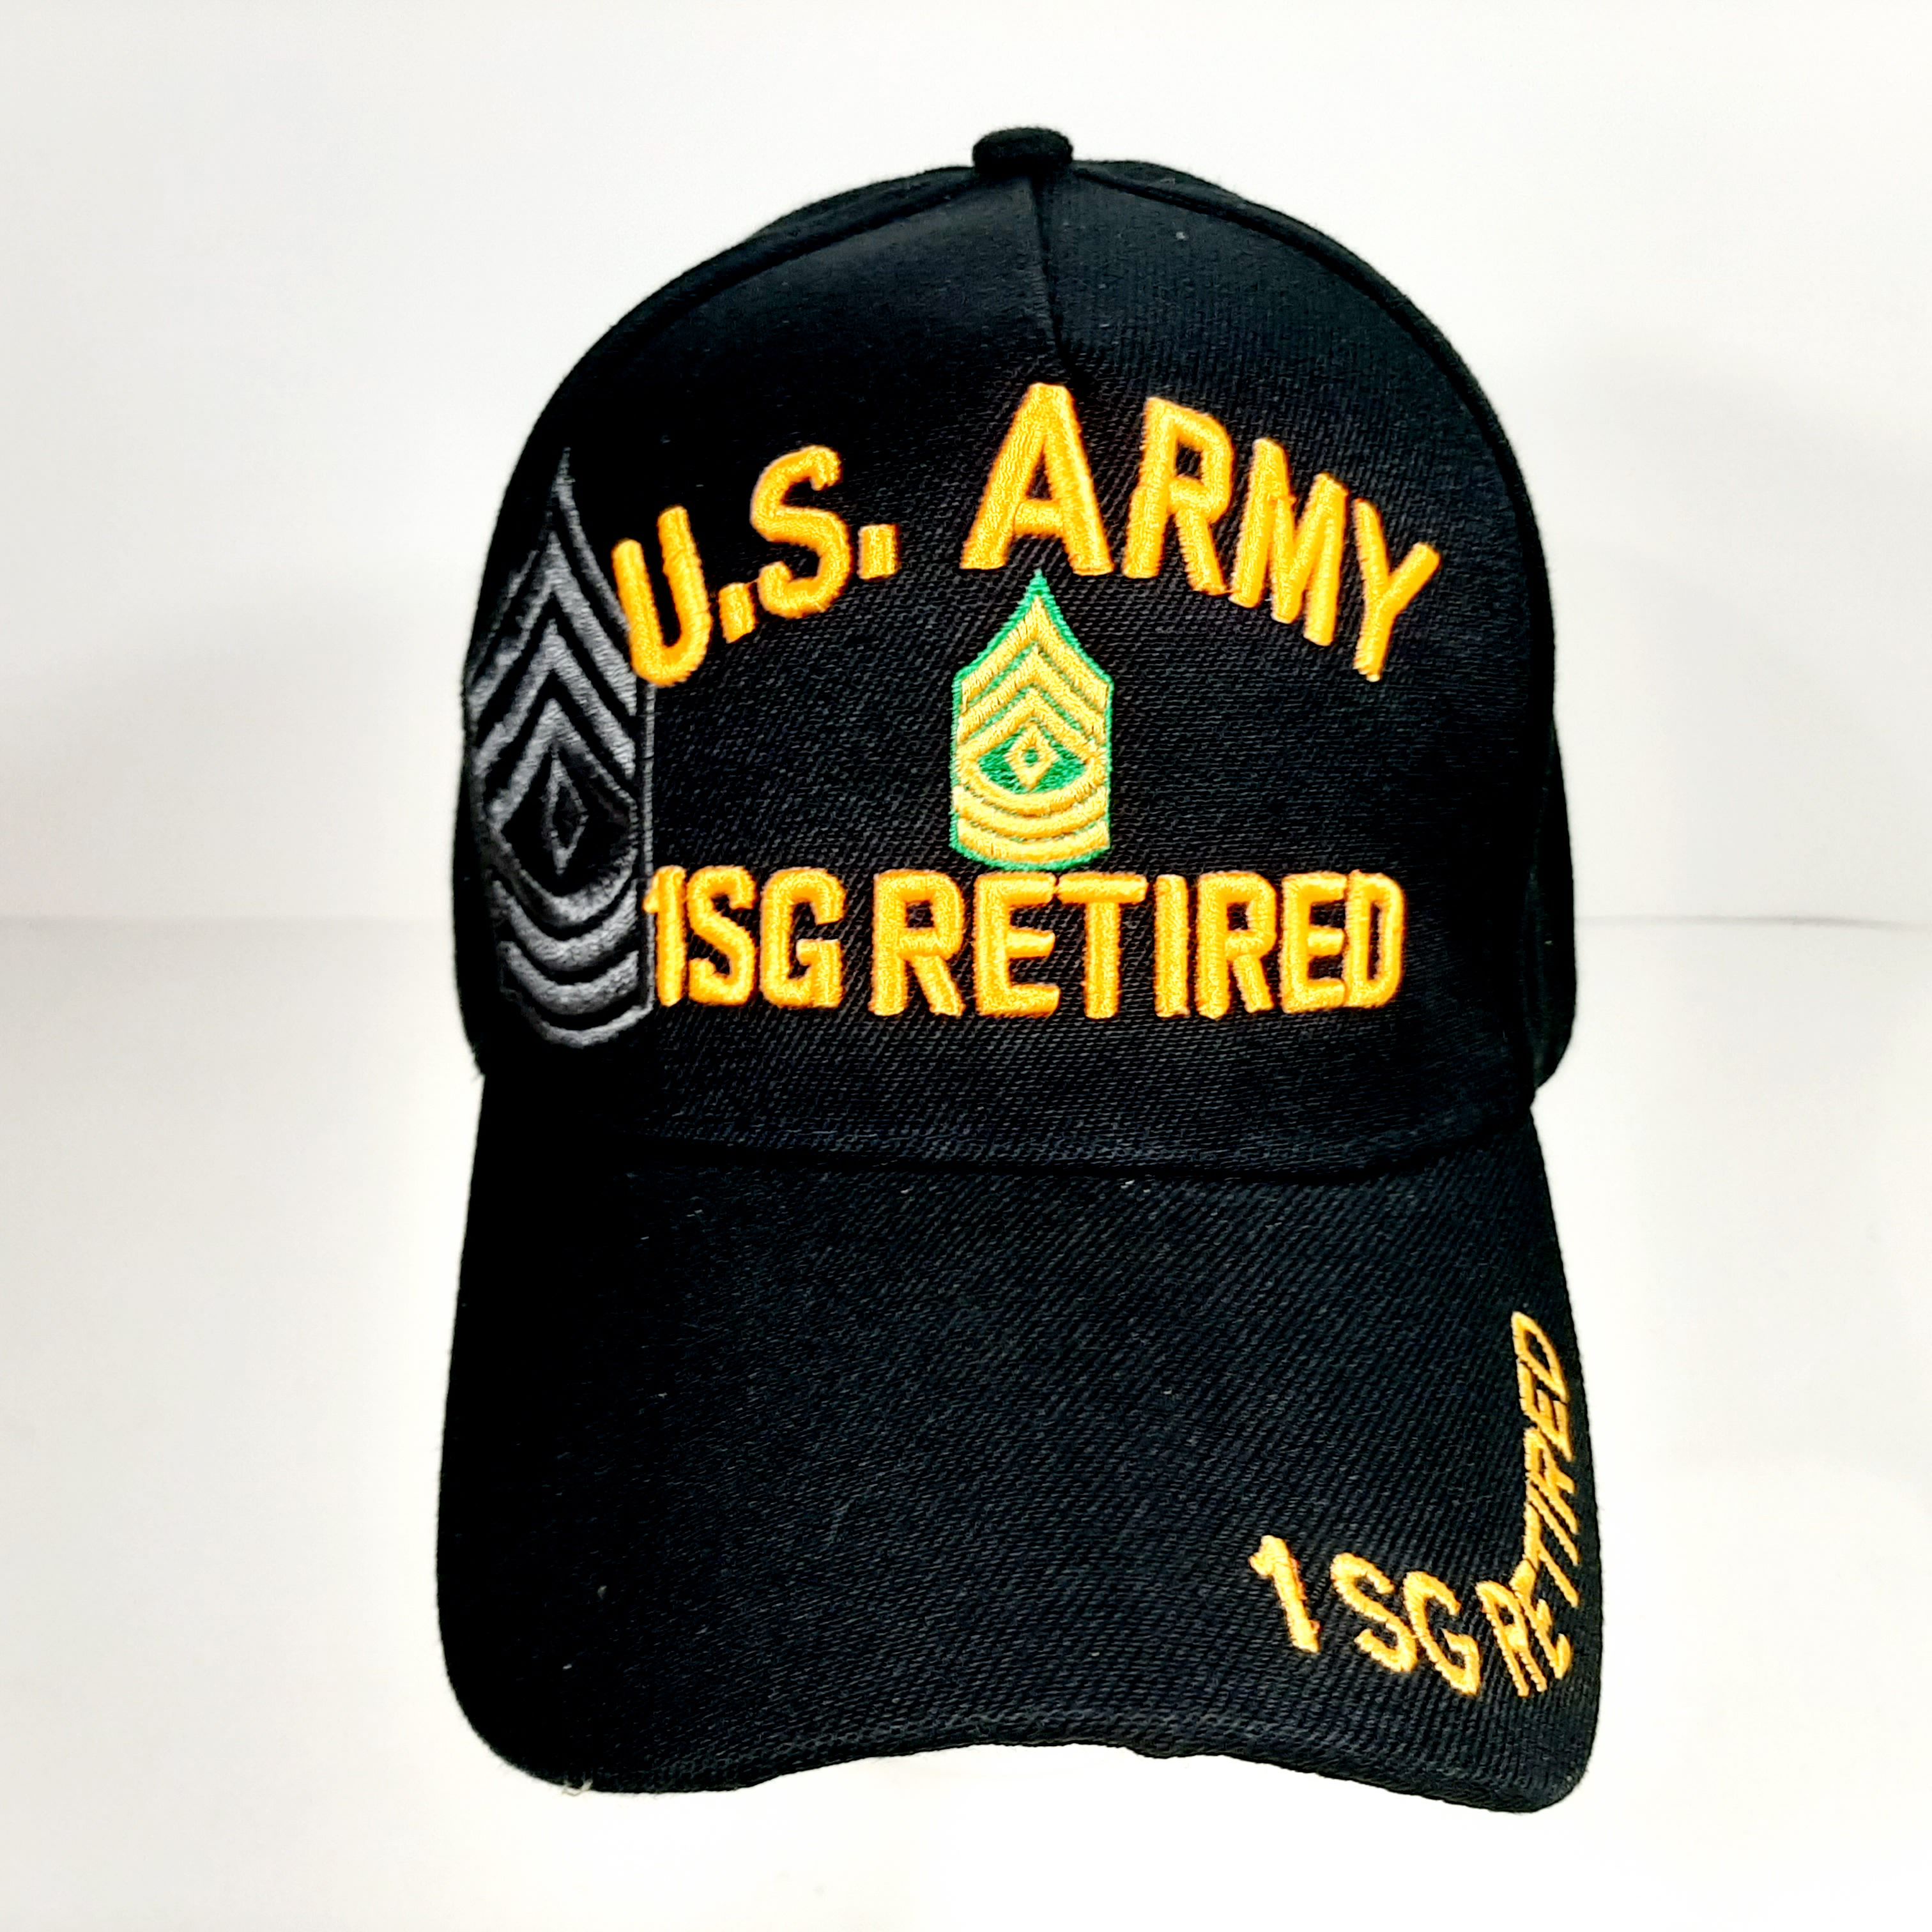 US Army 1SG Retired Men's Ball Cap Hat Black Embroidered Acrylic H5